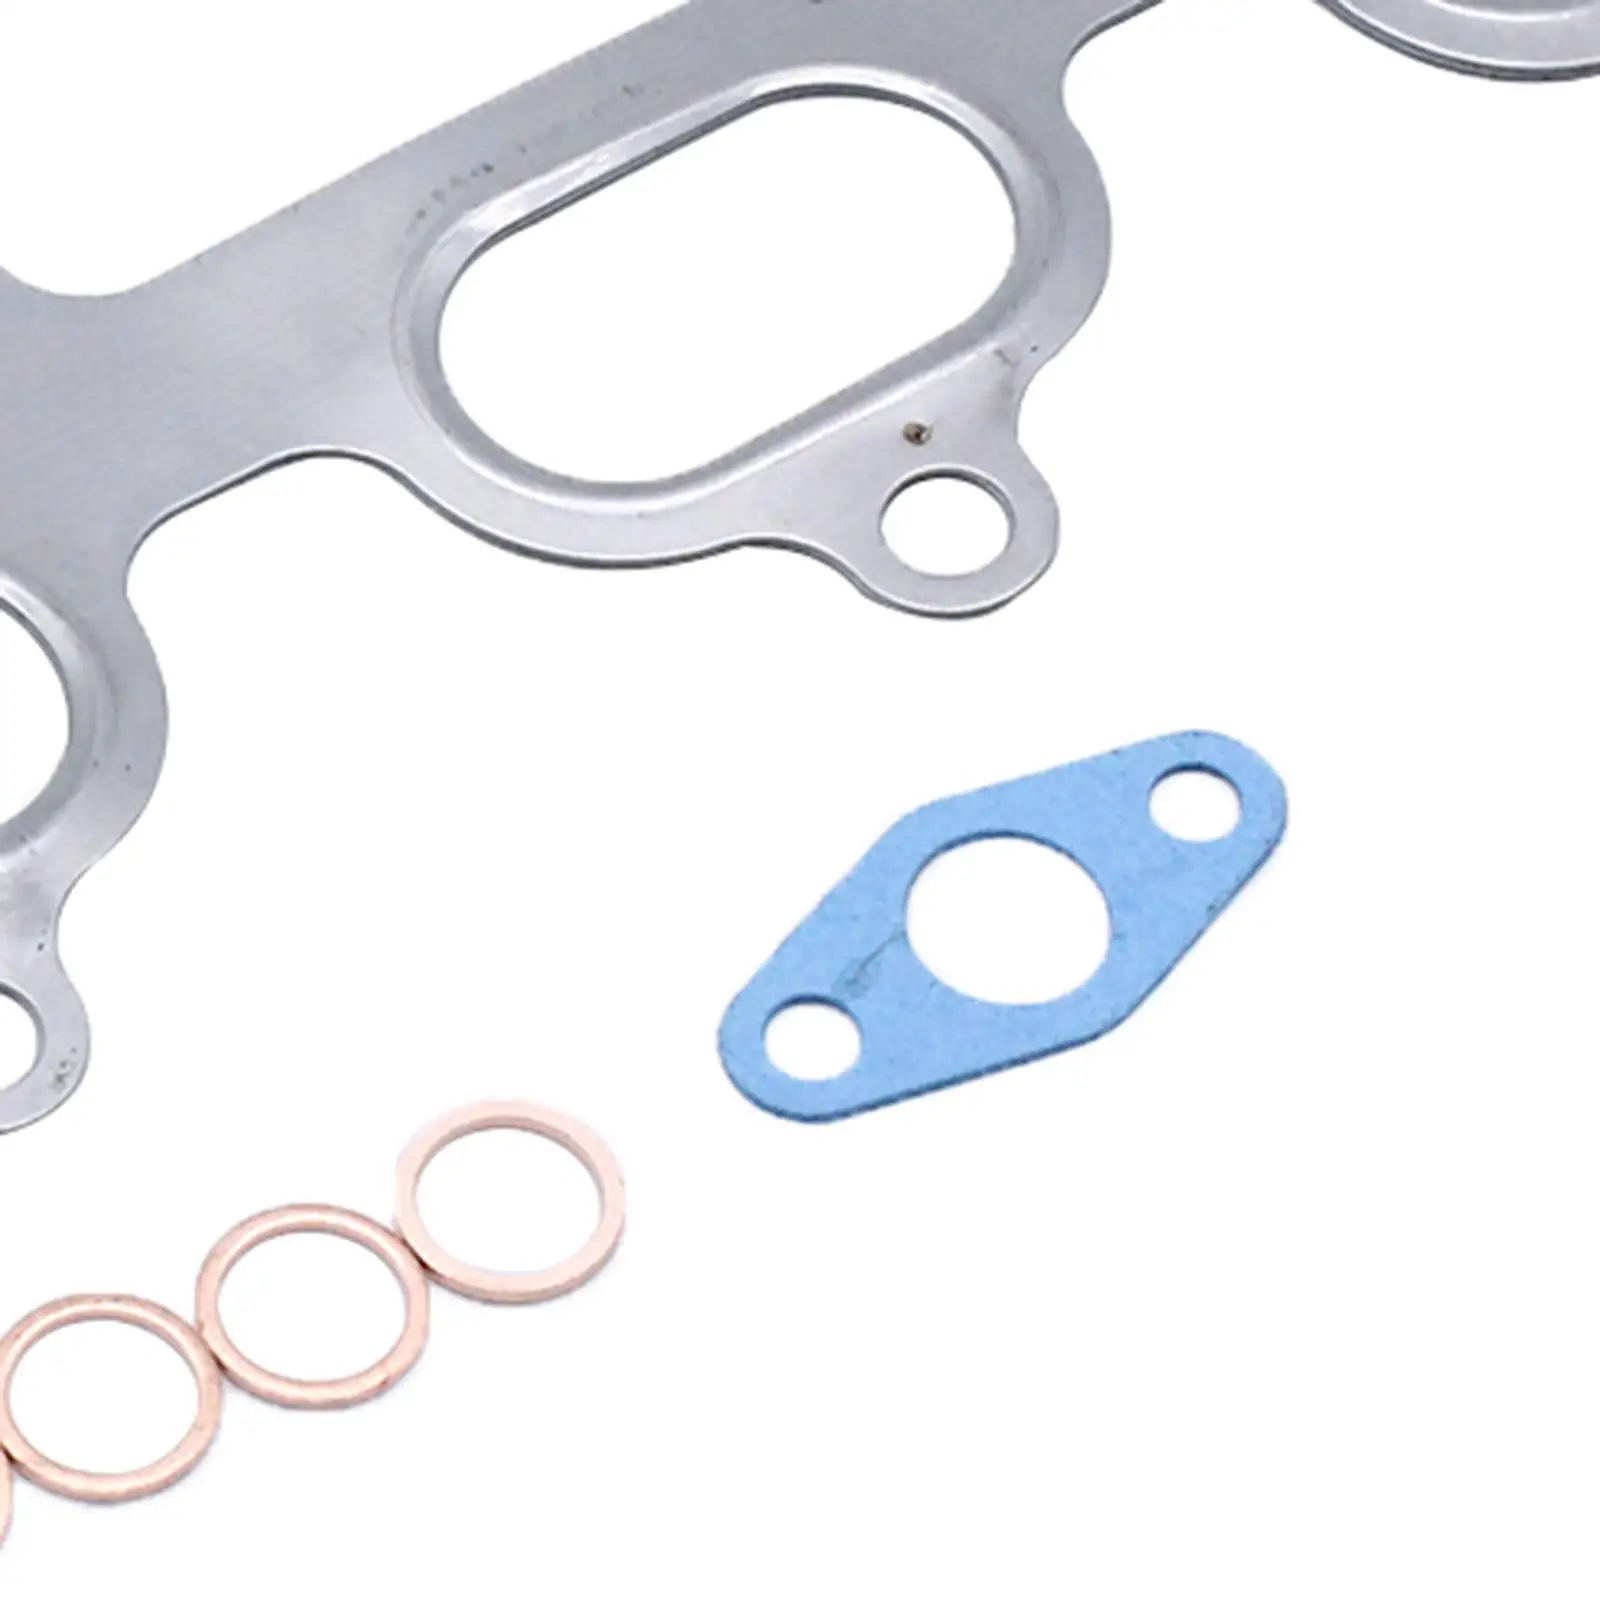 Exhaust Manifold Gasket Supplies Multi-Layer Fit for Vauxhall 04-10 5304-998-0048 90423508